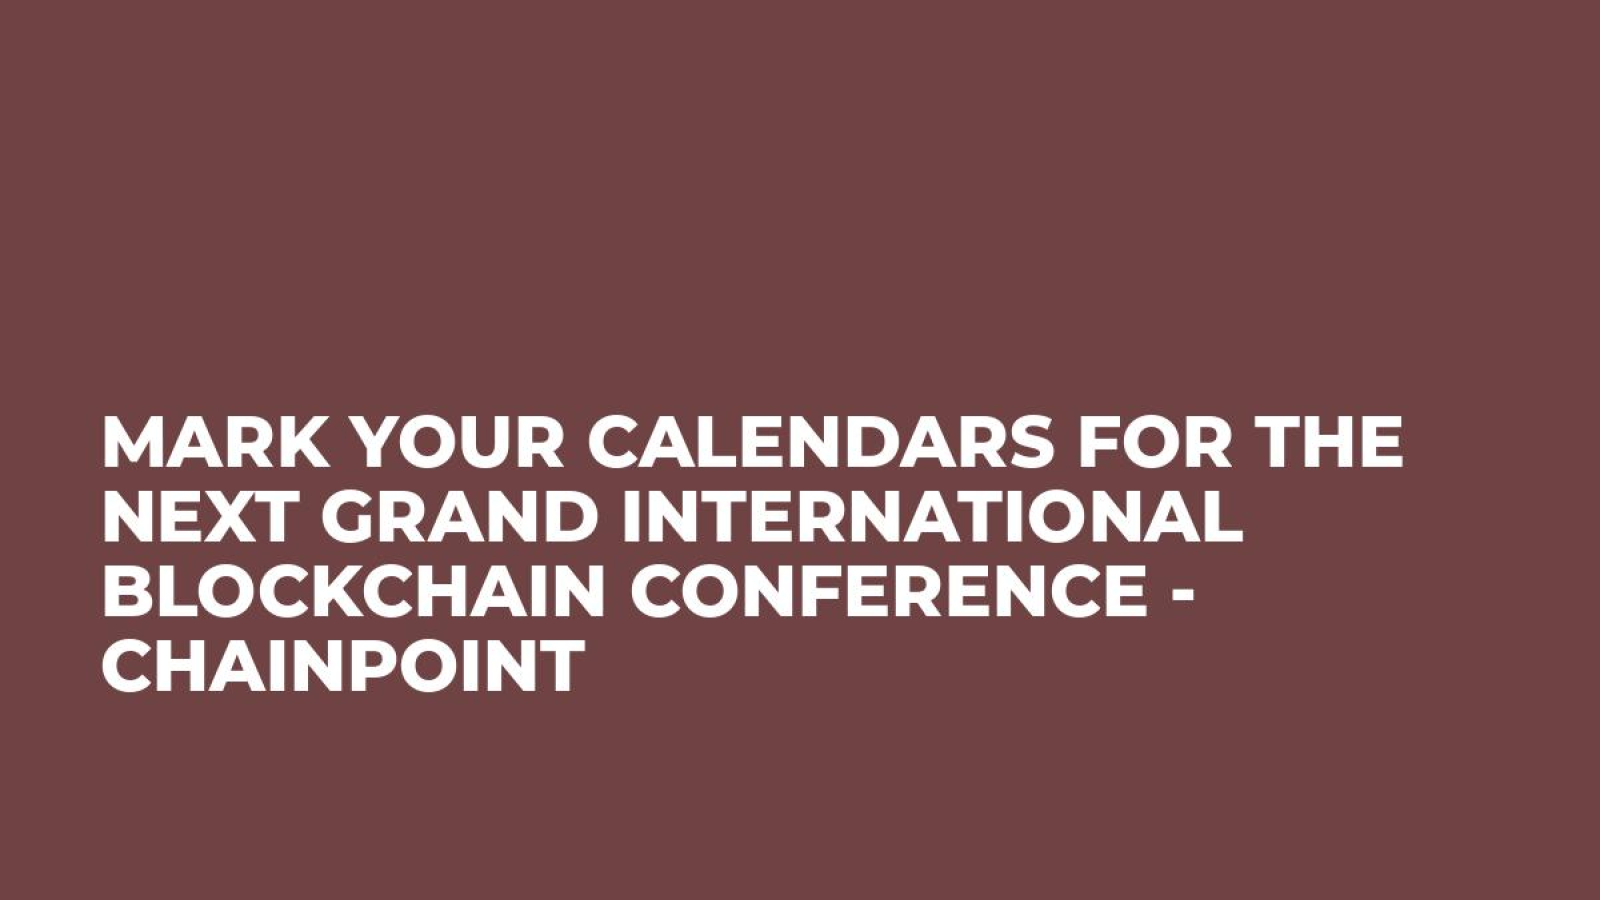 Mark your calendars for the next grand international blockchain conference - ChainPoint